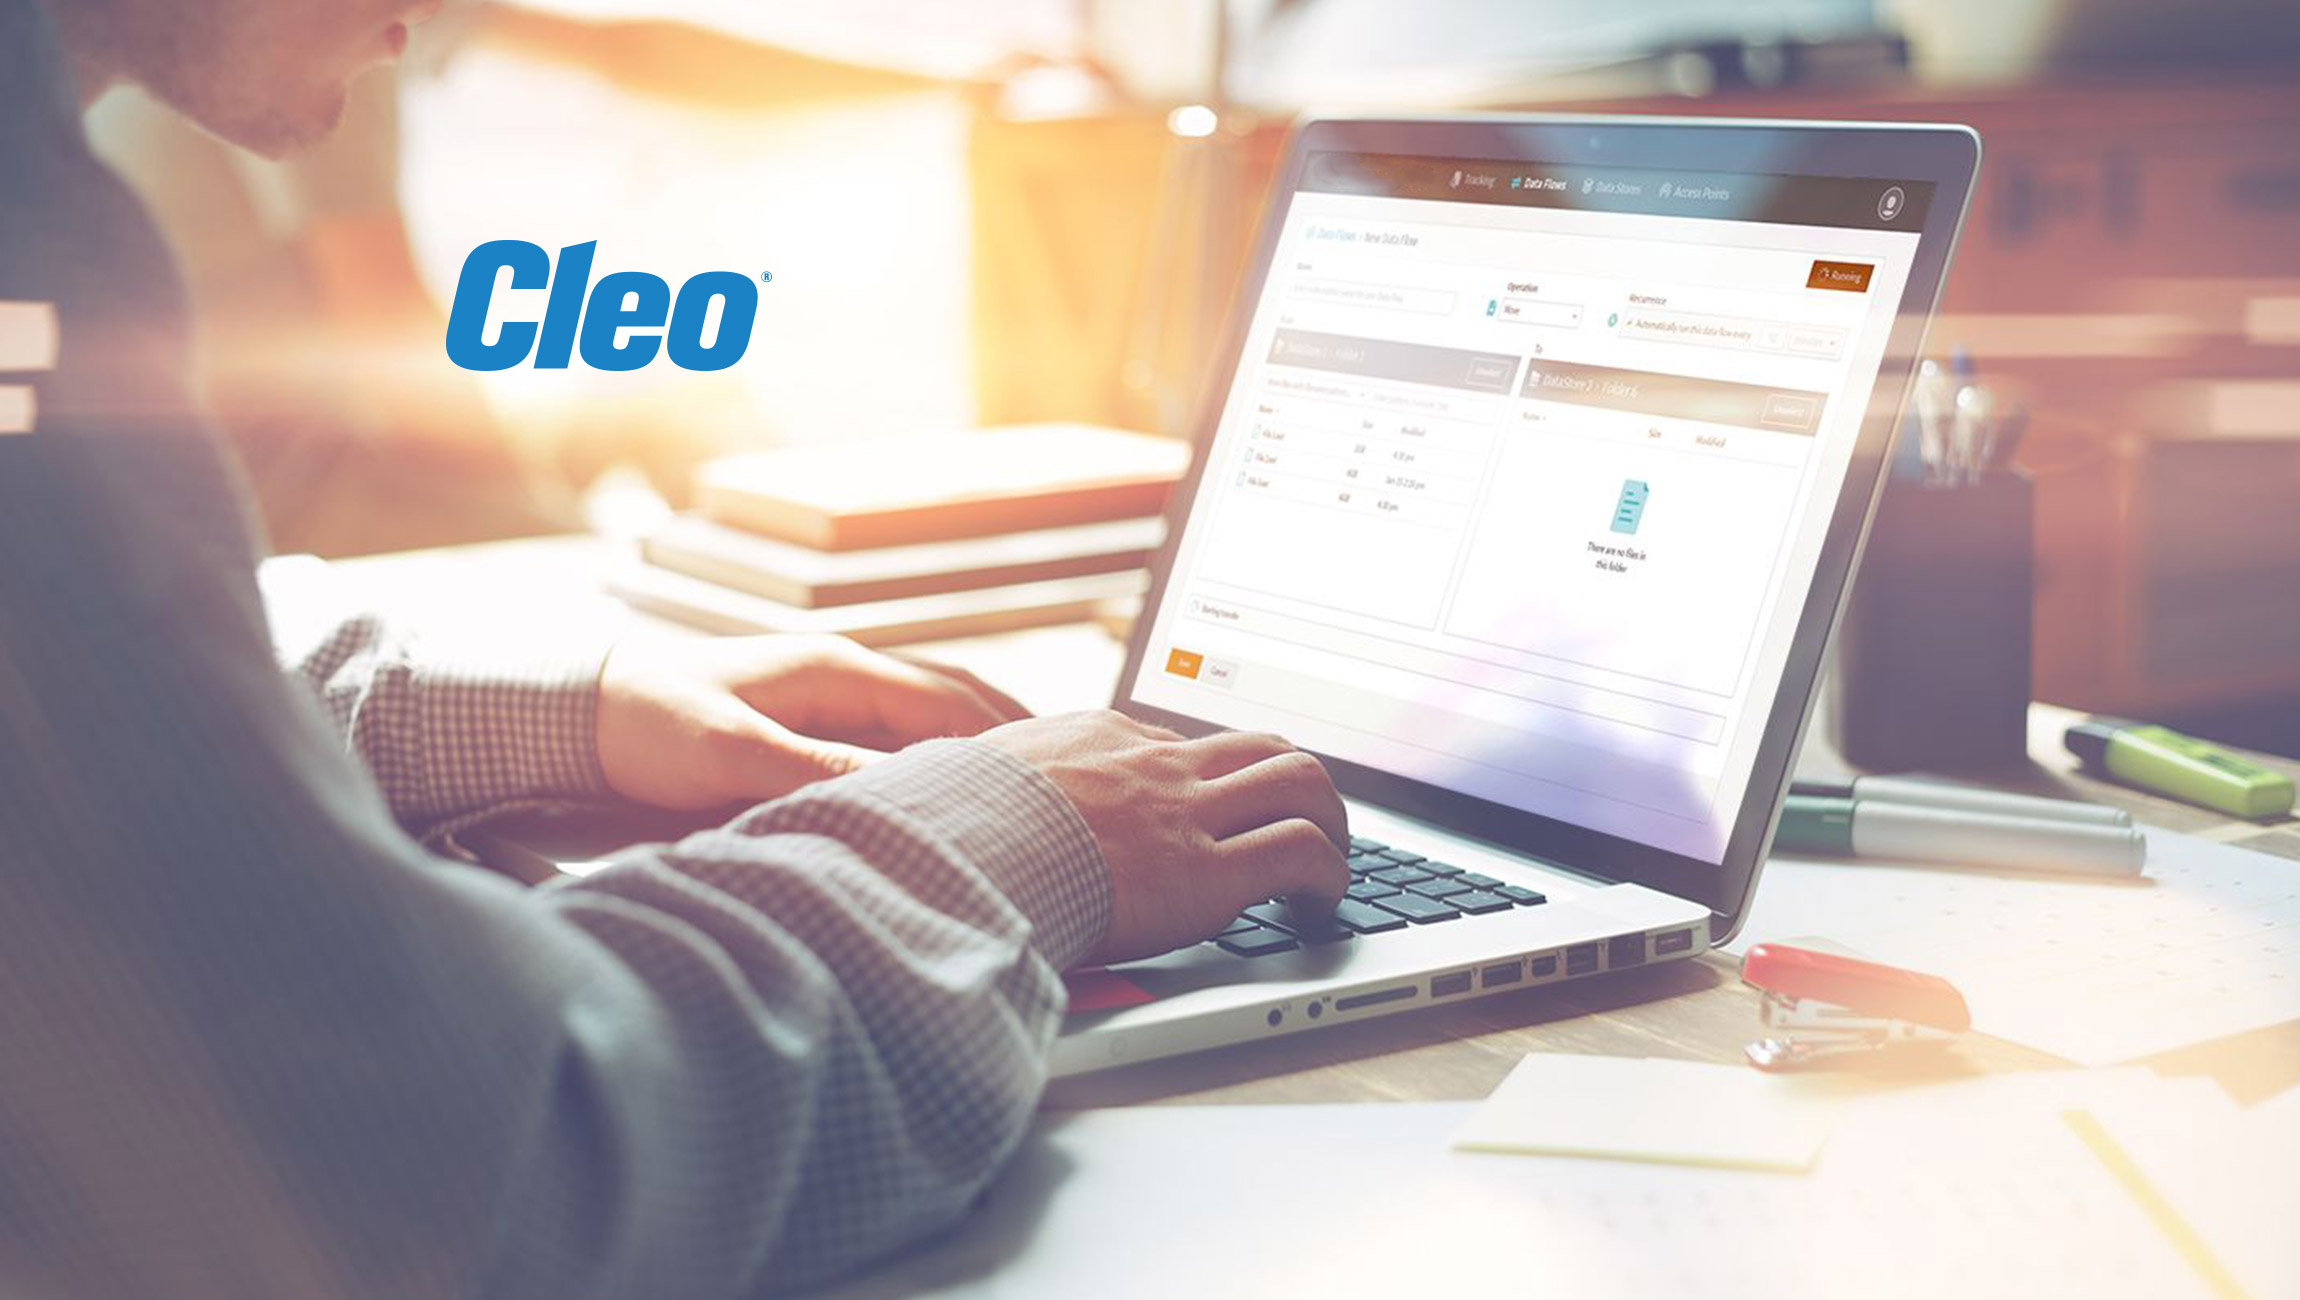 2022 Market Report: Cleo Survey Finds 40% Increase in Companies Losing Over $1 Million Annually Due to Poor Integration, Lack of Supply Chain Agility